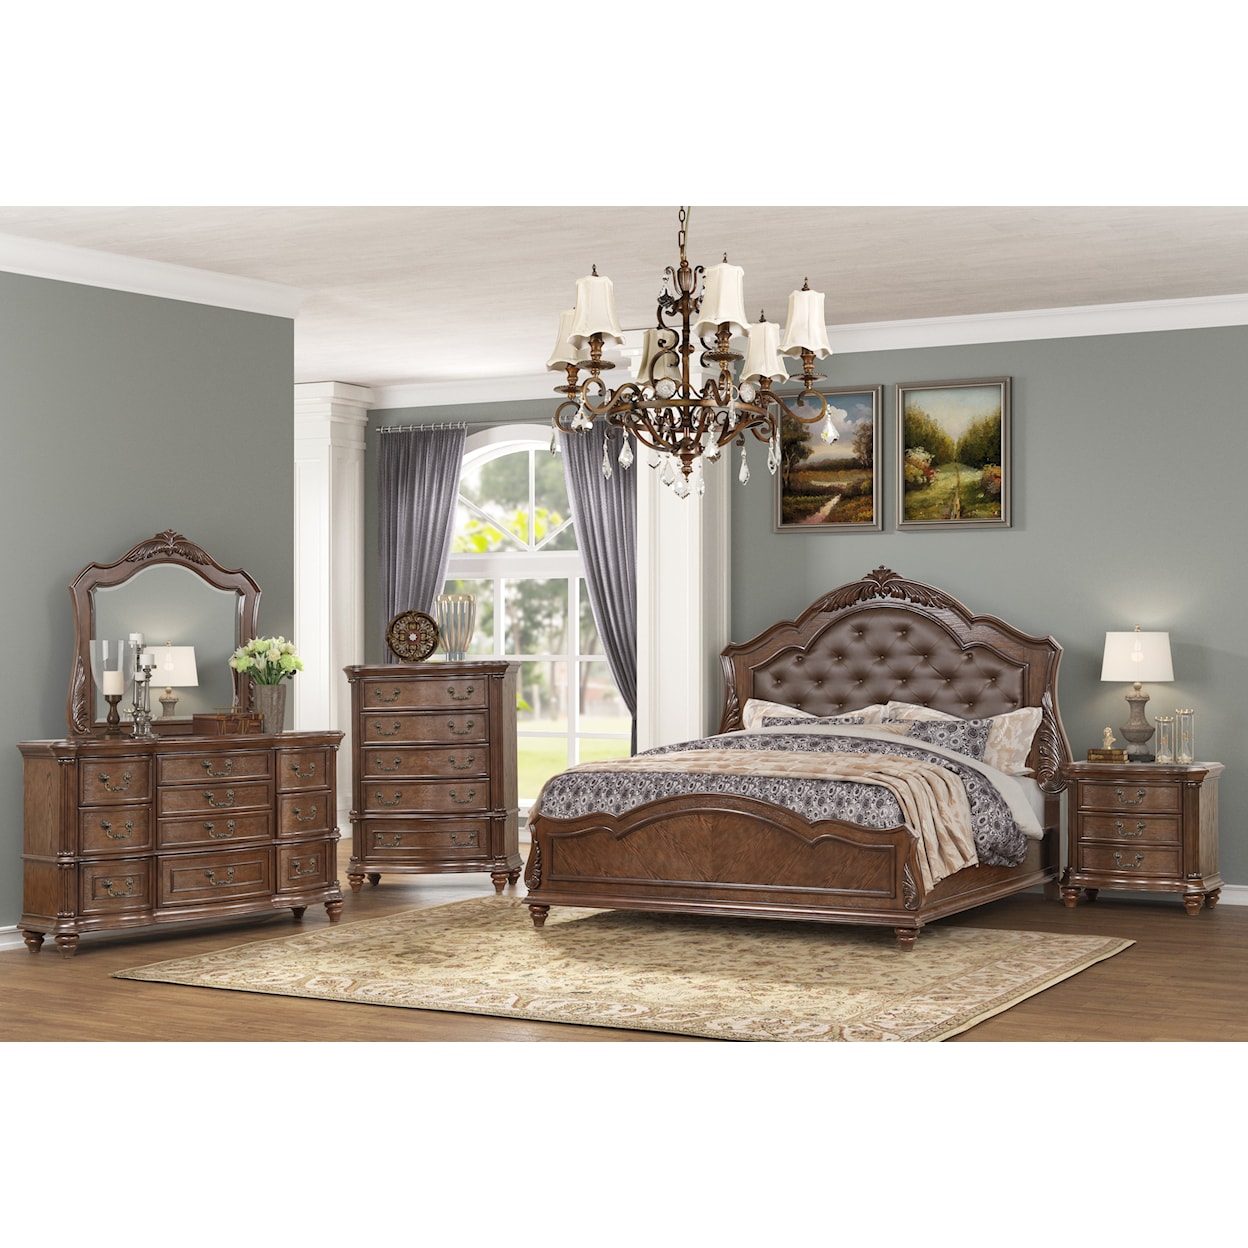 New Classic Roma Queen Upholstered Bed